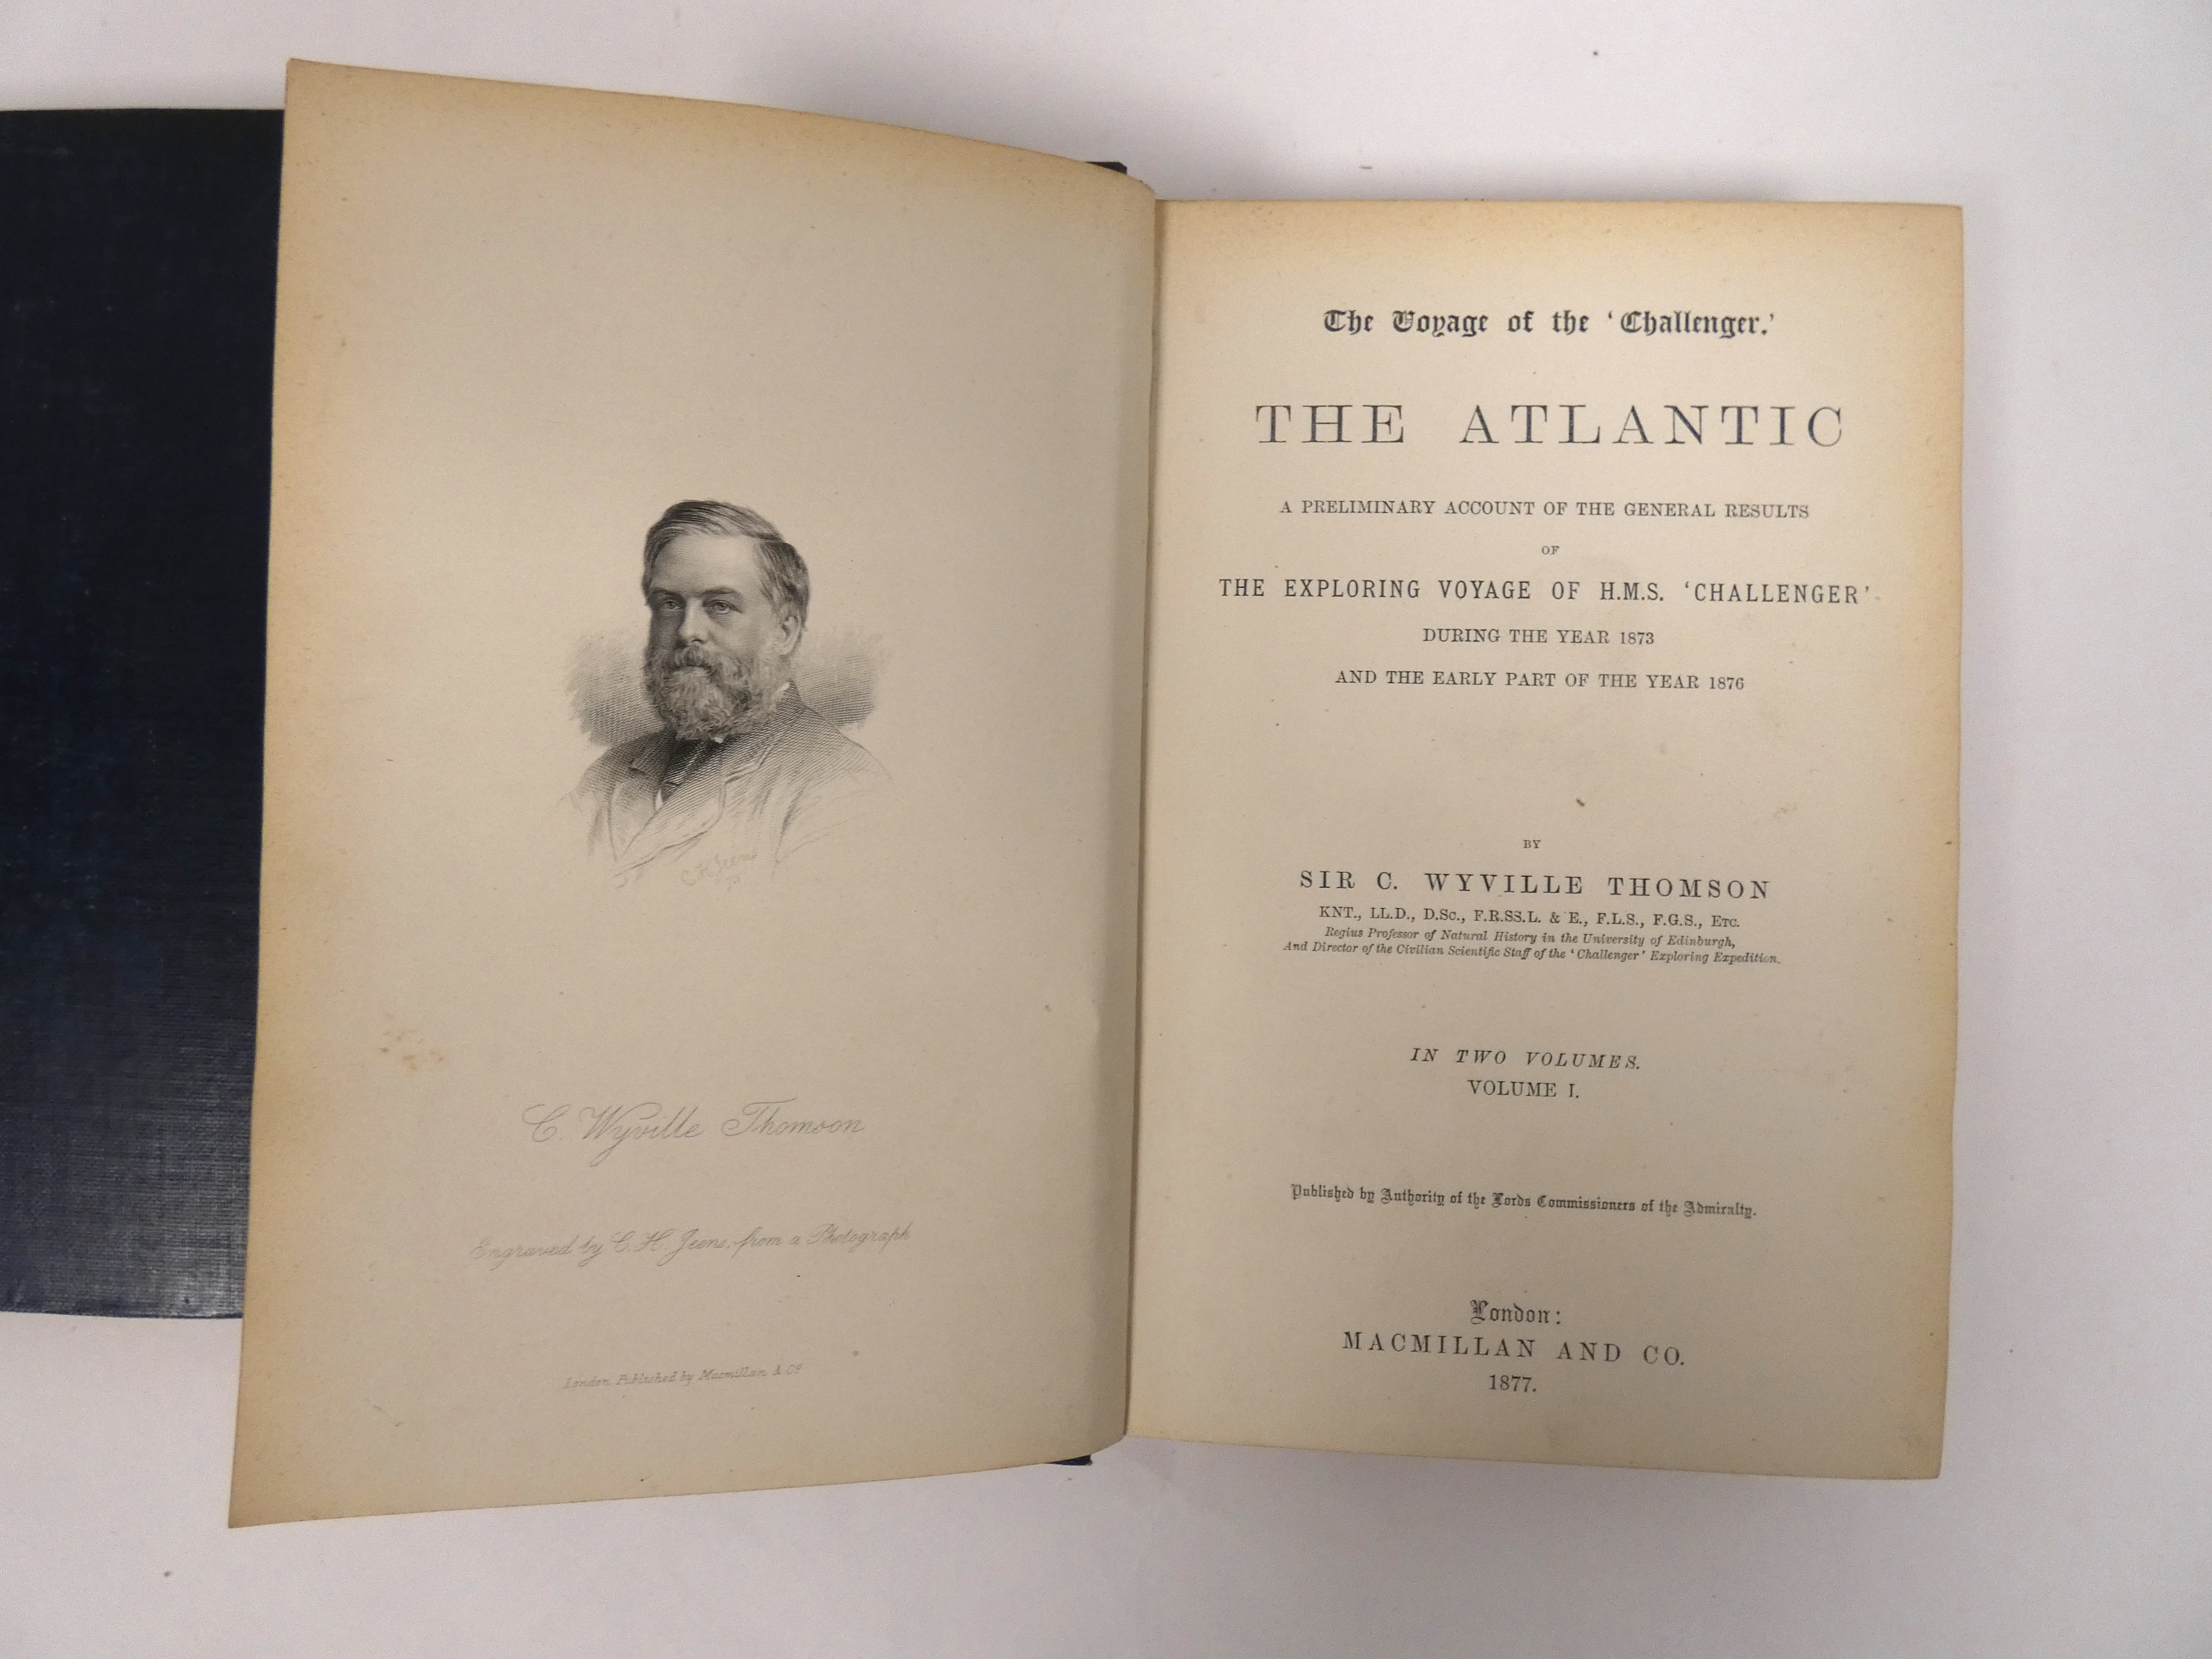 WYVILLE THOMSON SIR C.  The Voyage of the Challenger, the Atlantic, A Preliminary Account of the - Image 3 of 8